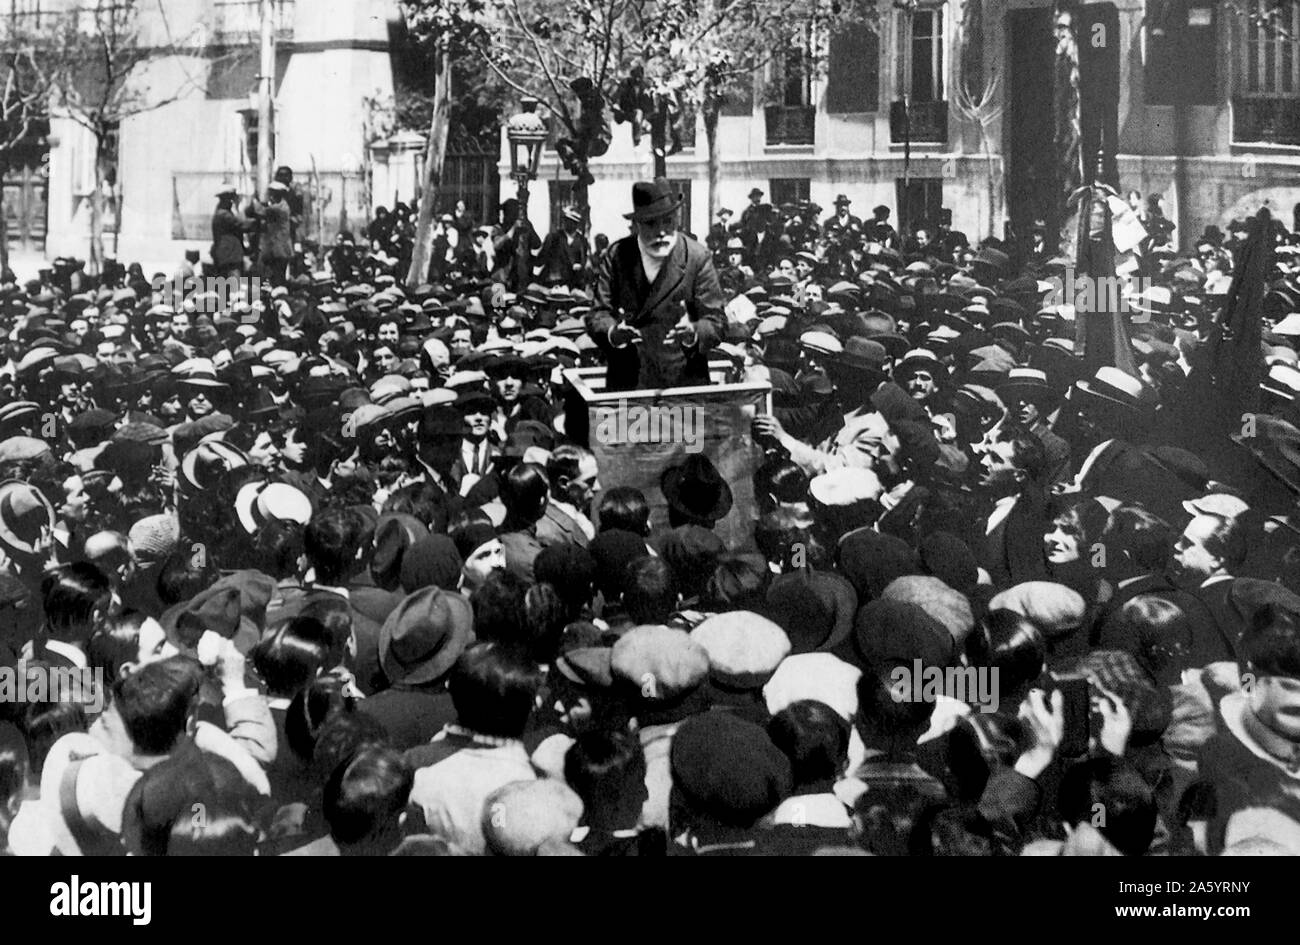 Paulino Iglesias Posse 1850 – 1925, better known as Pablo Iglesias, Spanish socialist and labour leader addressing a crowd in 1920. He is regarded as the father of Spanish socialism; having founded the Spanish Socialist Workers' Party (PSOE) in 1879 and the Spanish General Workers' Union (UGT) in 1888. Stock Photo